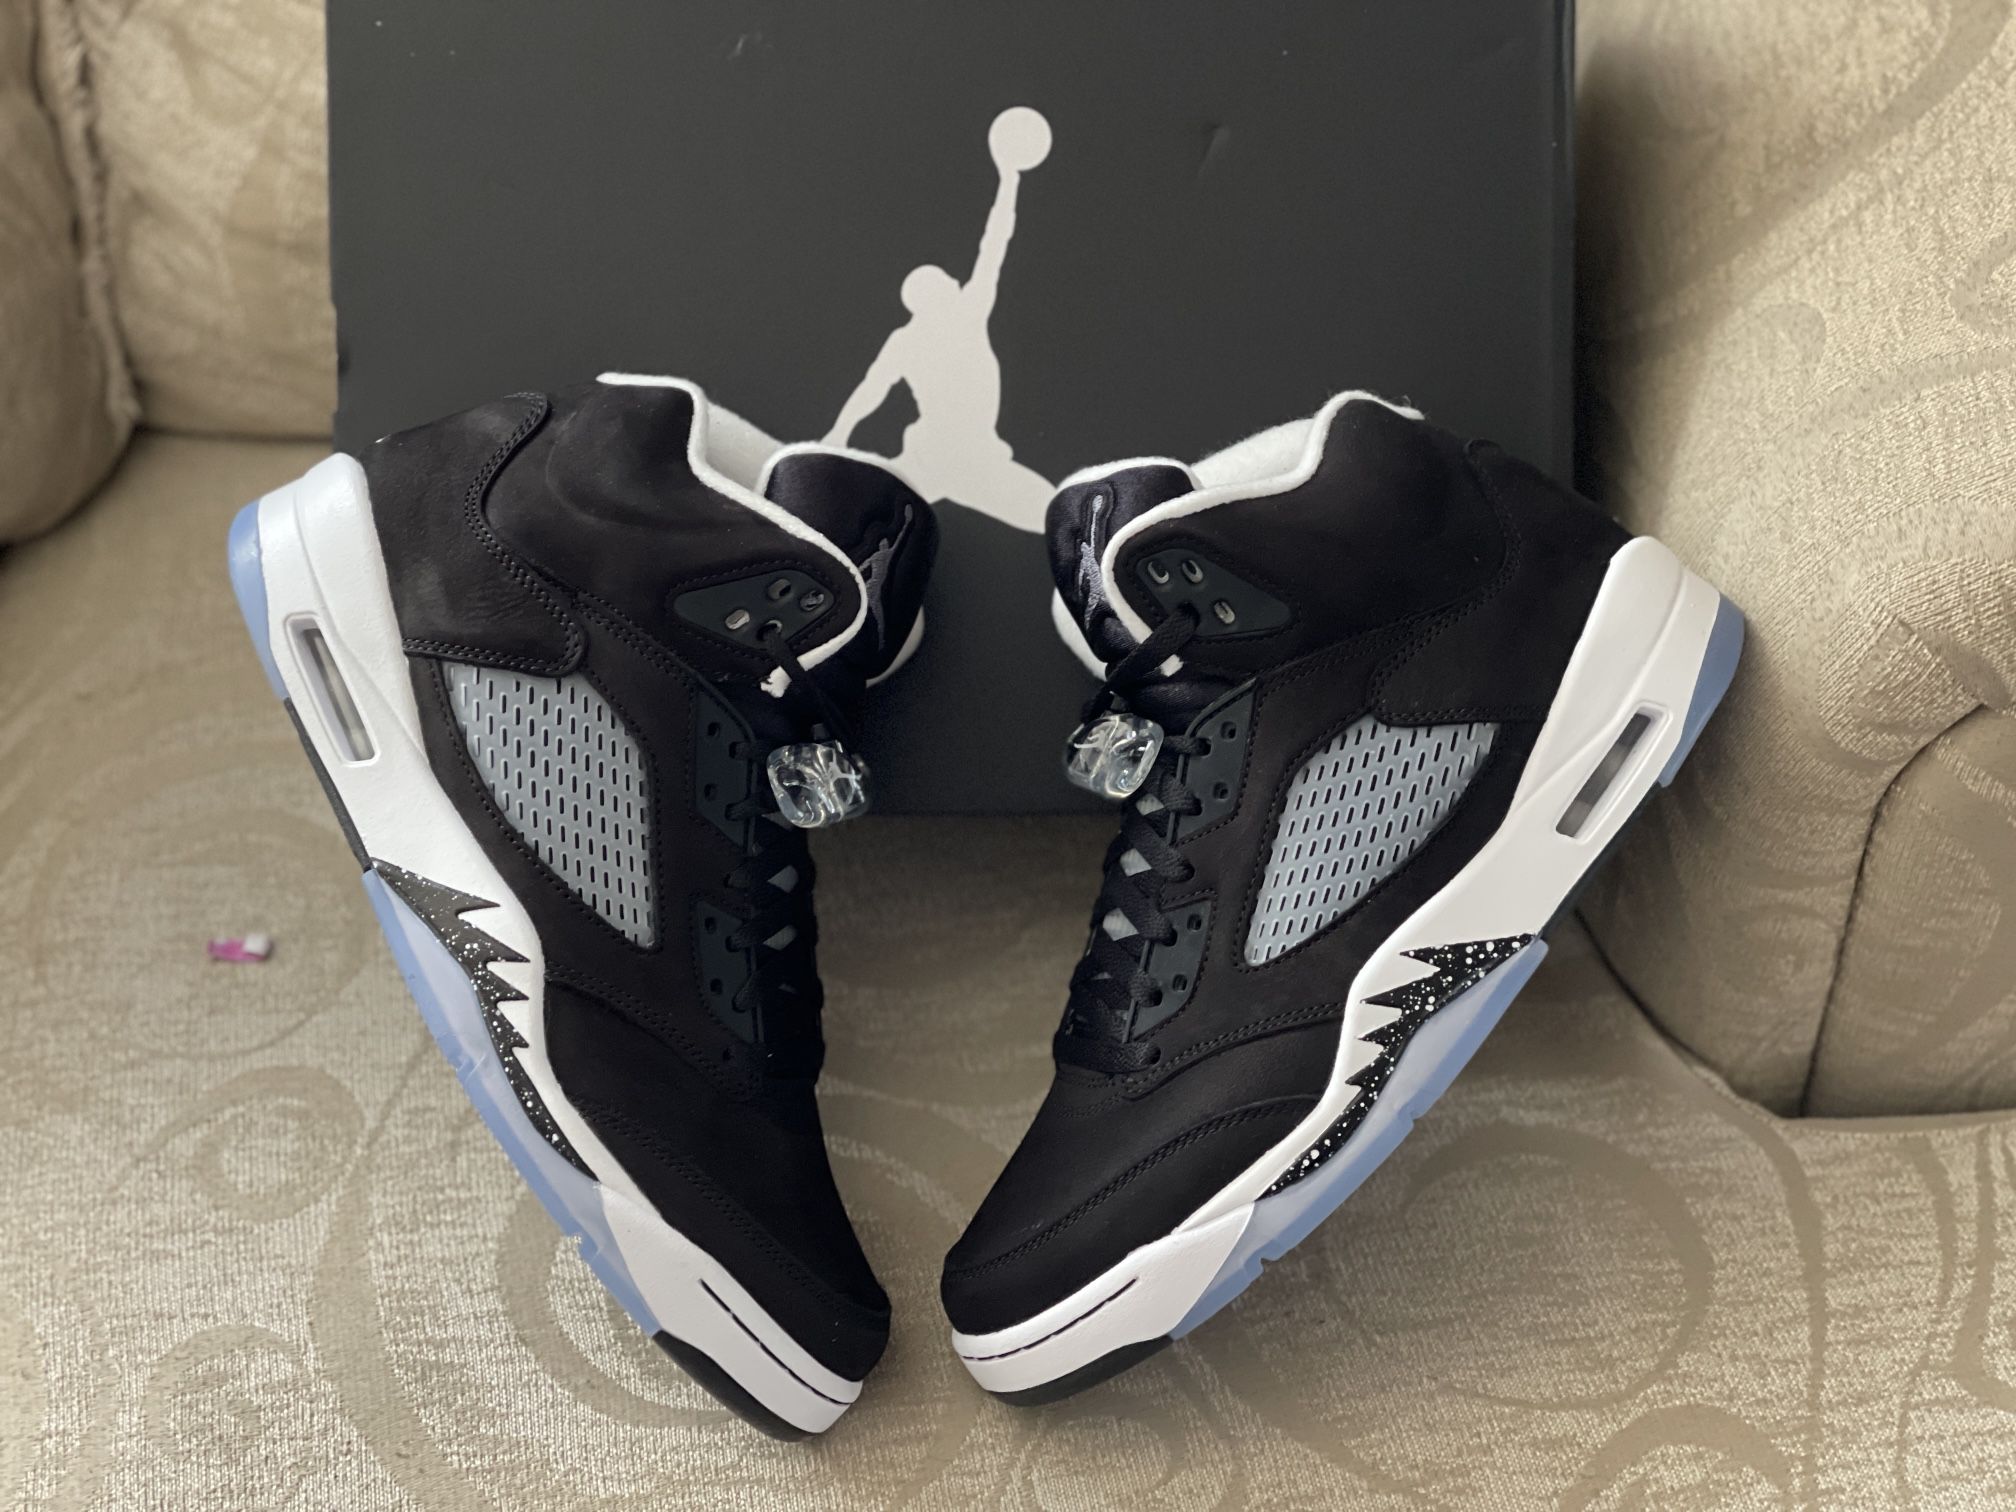 Air Jordan Retro 5 Moonlight Size 9.5, 10, 10.5 And 12 Available 